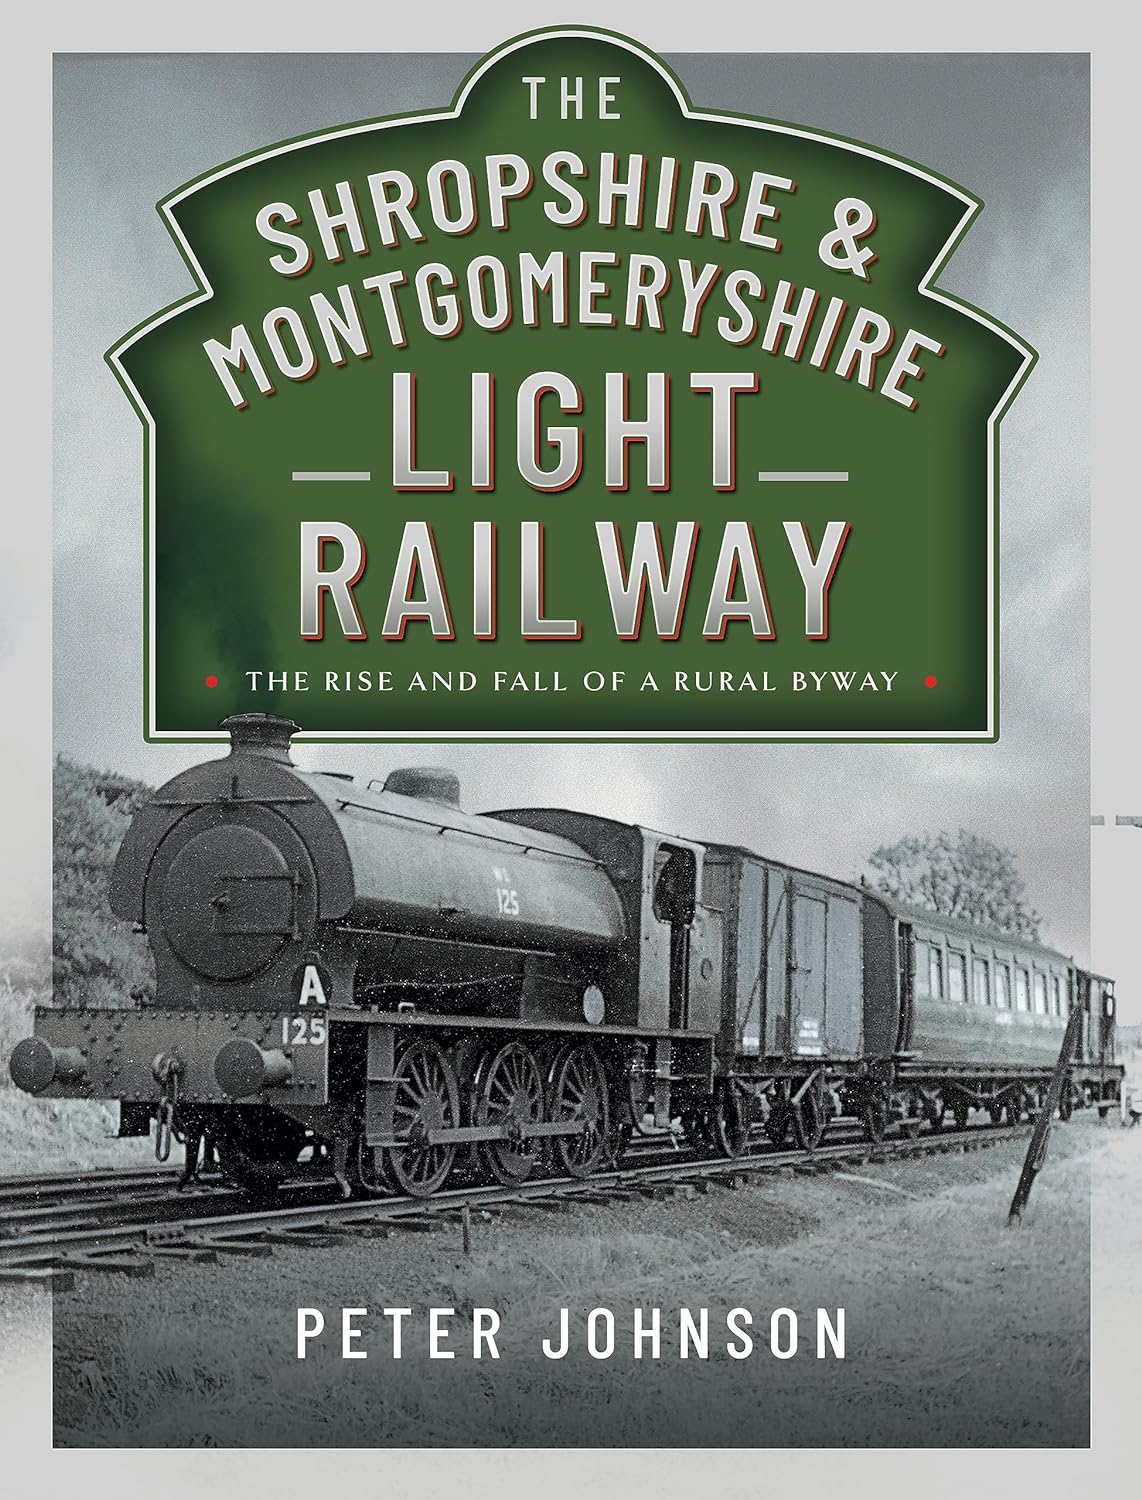 The Shropshire & Montgomeryshire Light Railway The Rise and Fall of a Rural Byway